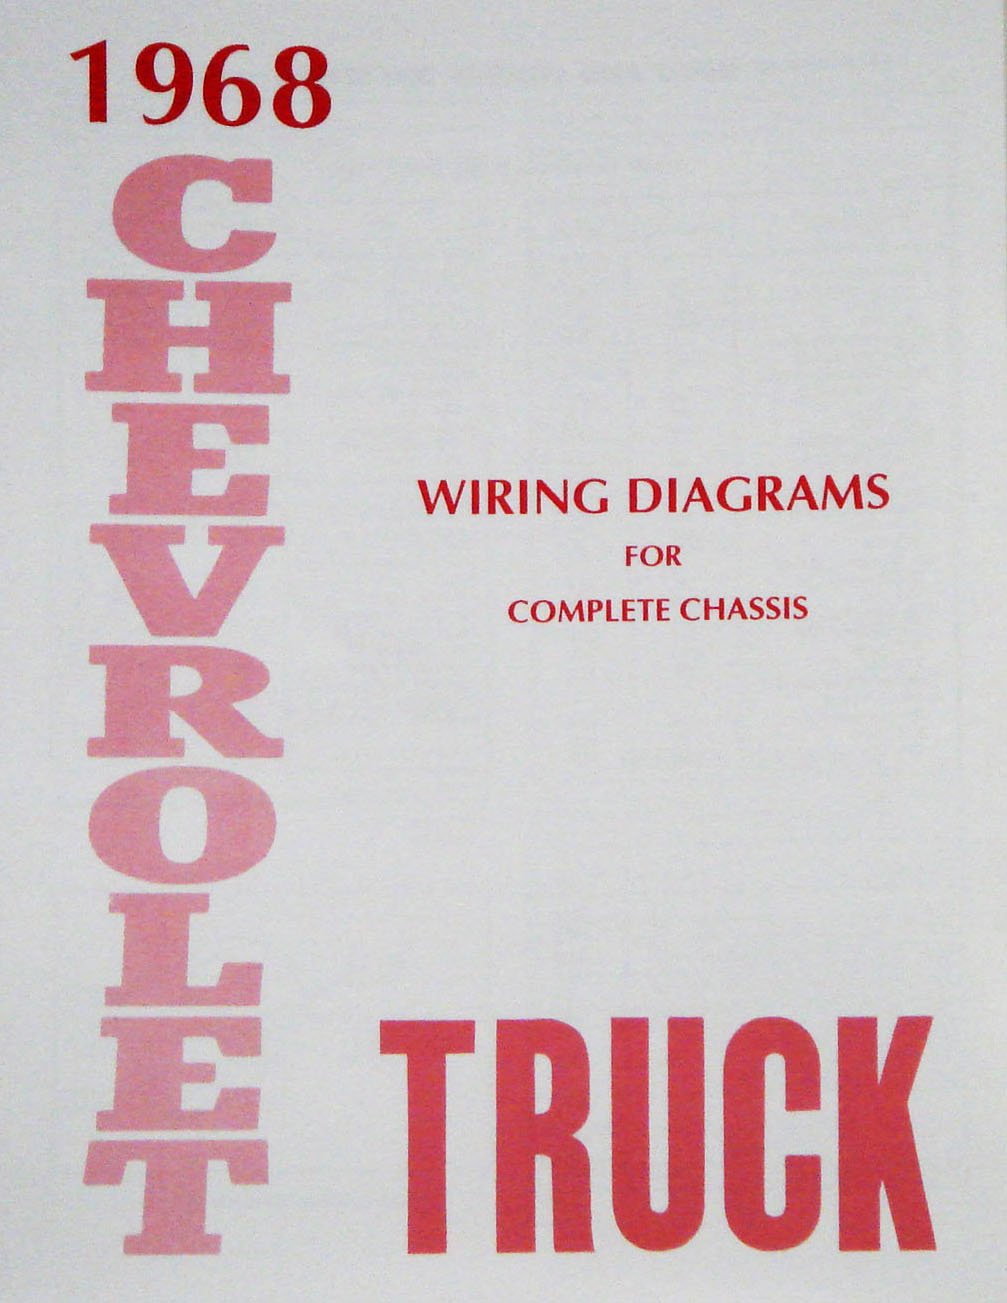 Wiring Diagram Manual for 1968 Chevrolet Truck